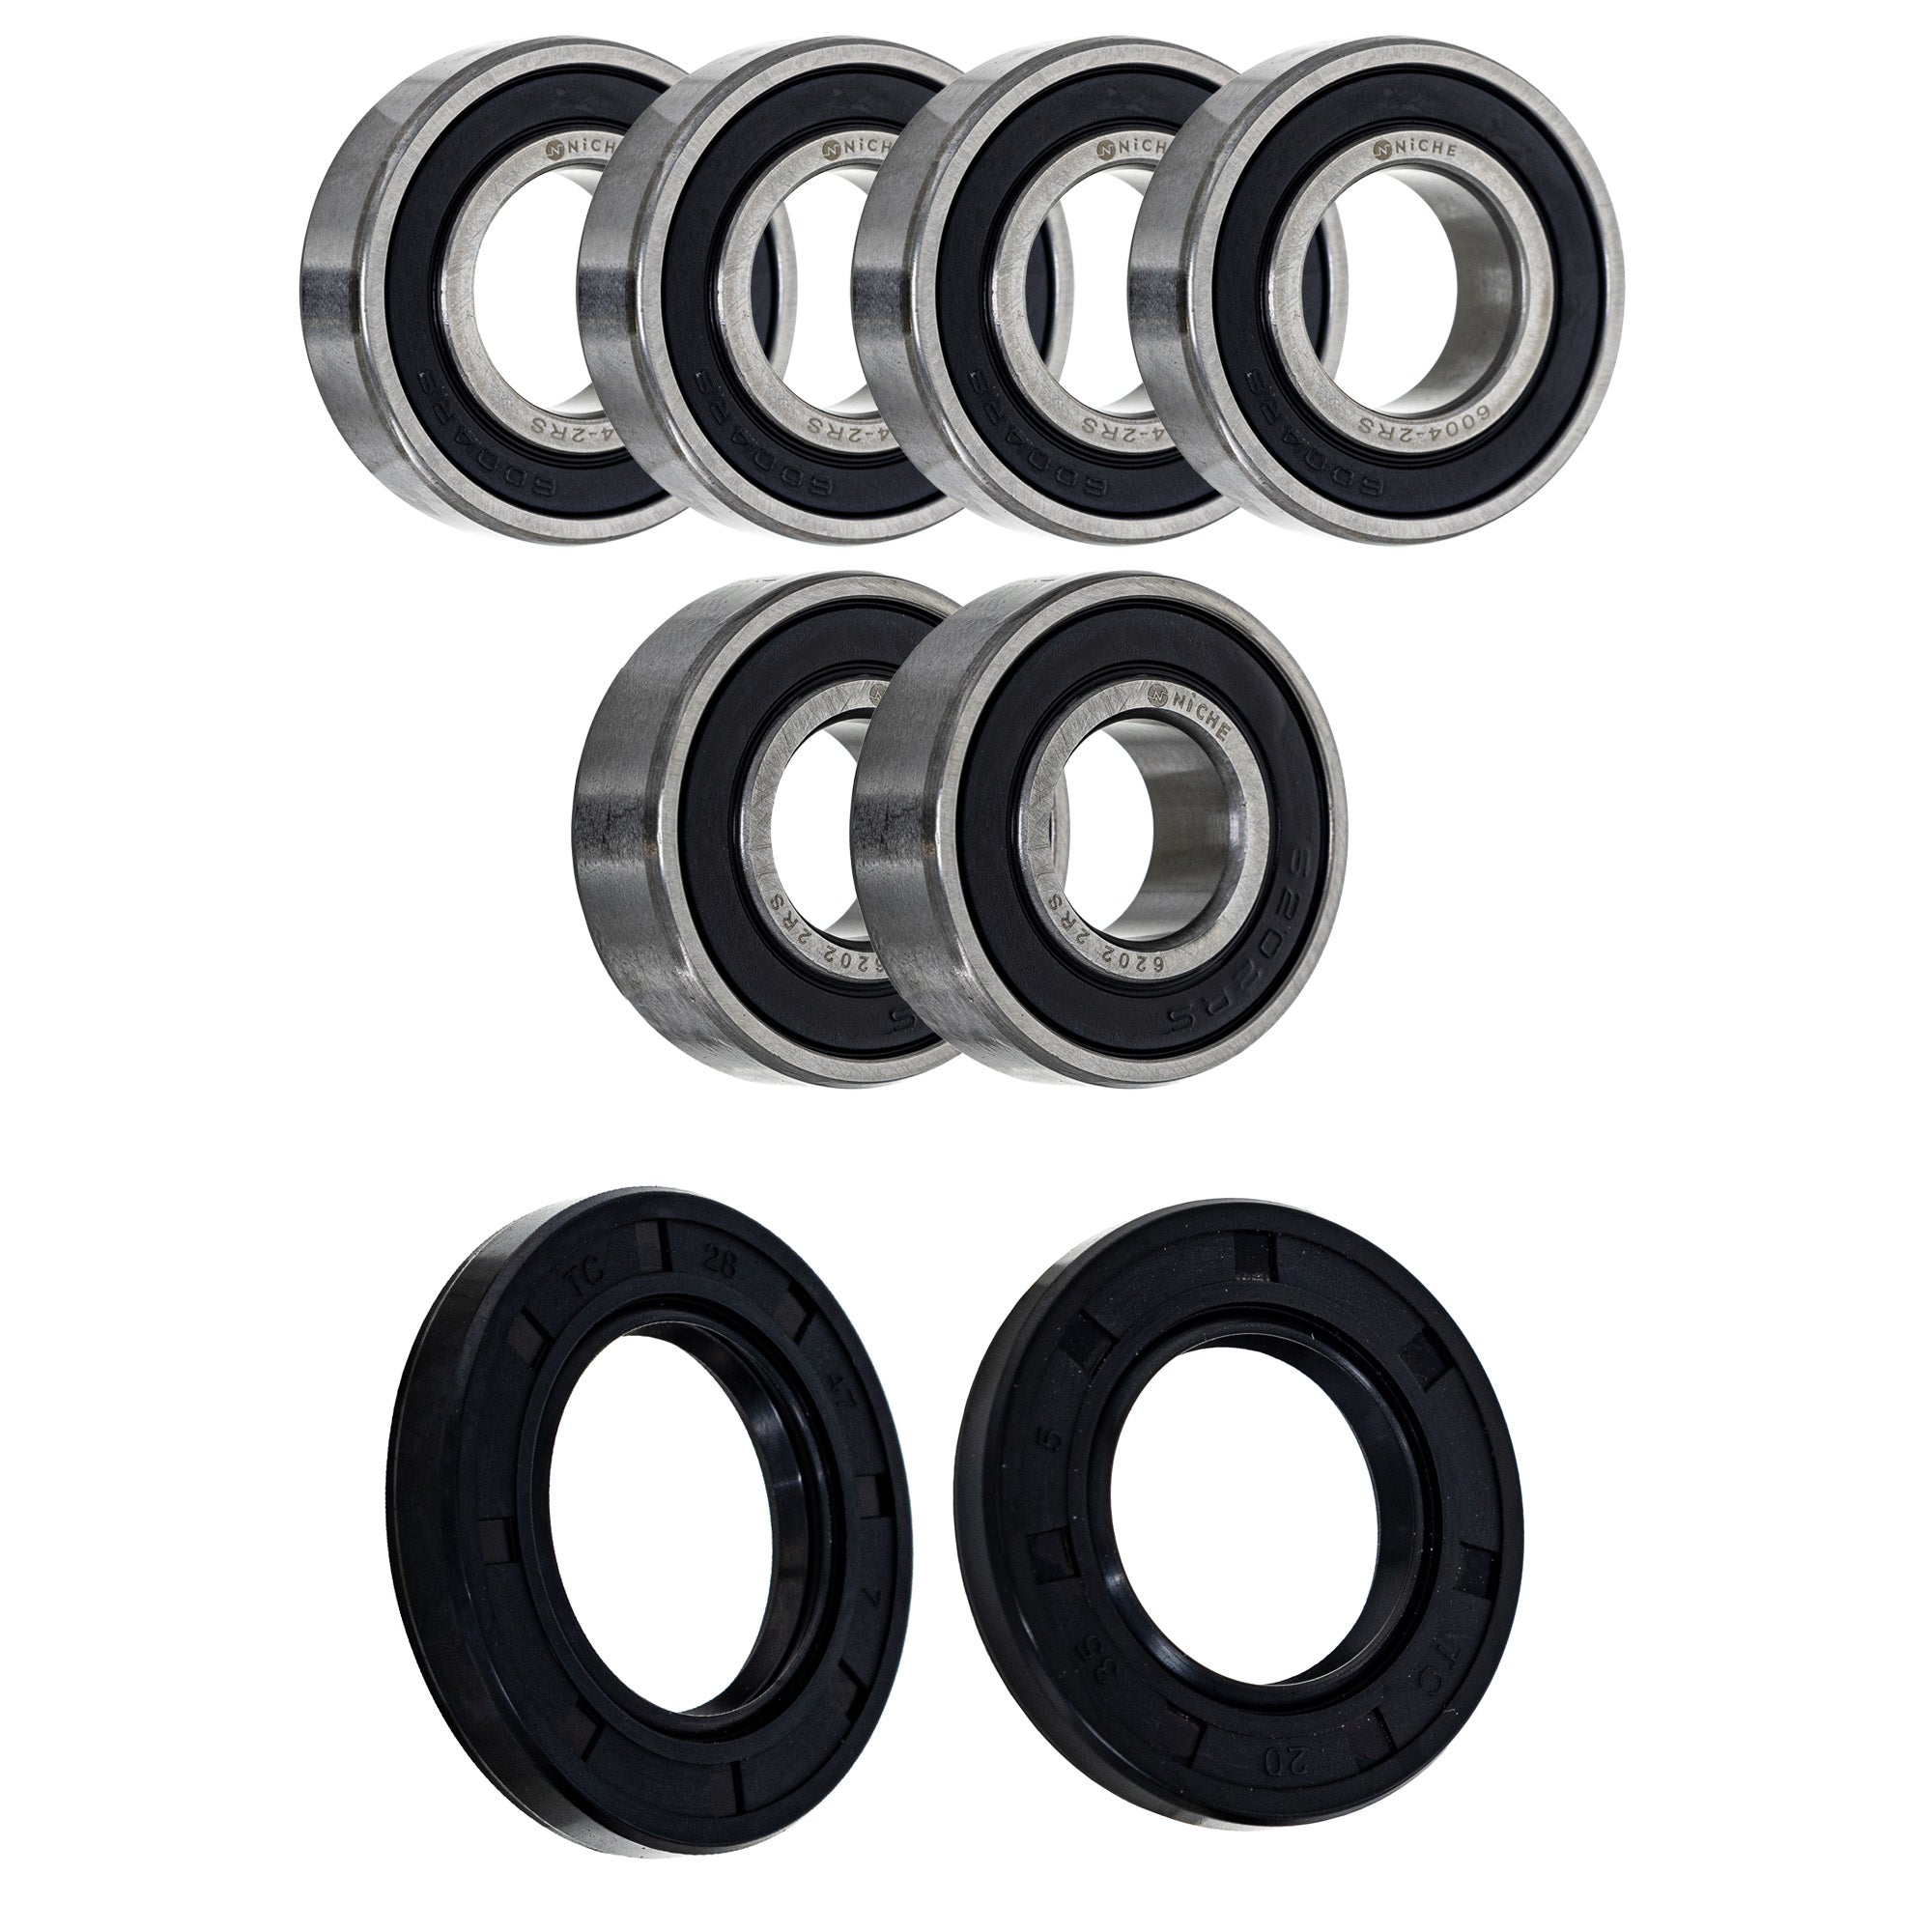 Wheel Bearing Seal Kit for zOTHER Ref No YZ250 NICHE MK1008719